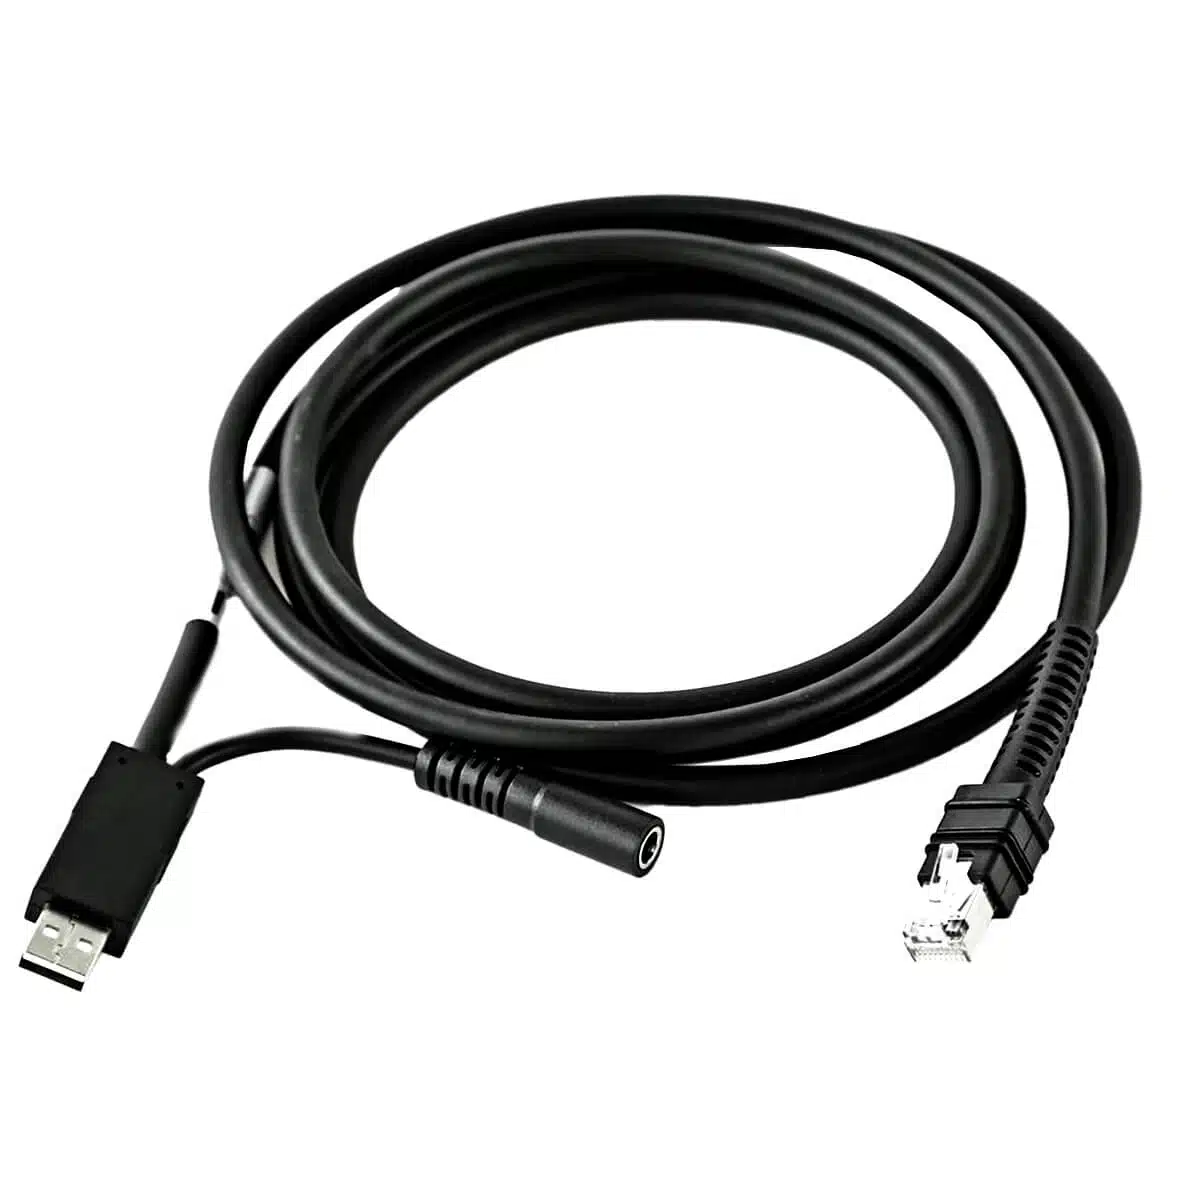 CBA-U42-S07PAR Zebra 2 Meters USB-Shielded Straight Cable for 12 Volts Power Supply